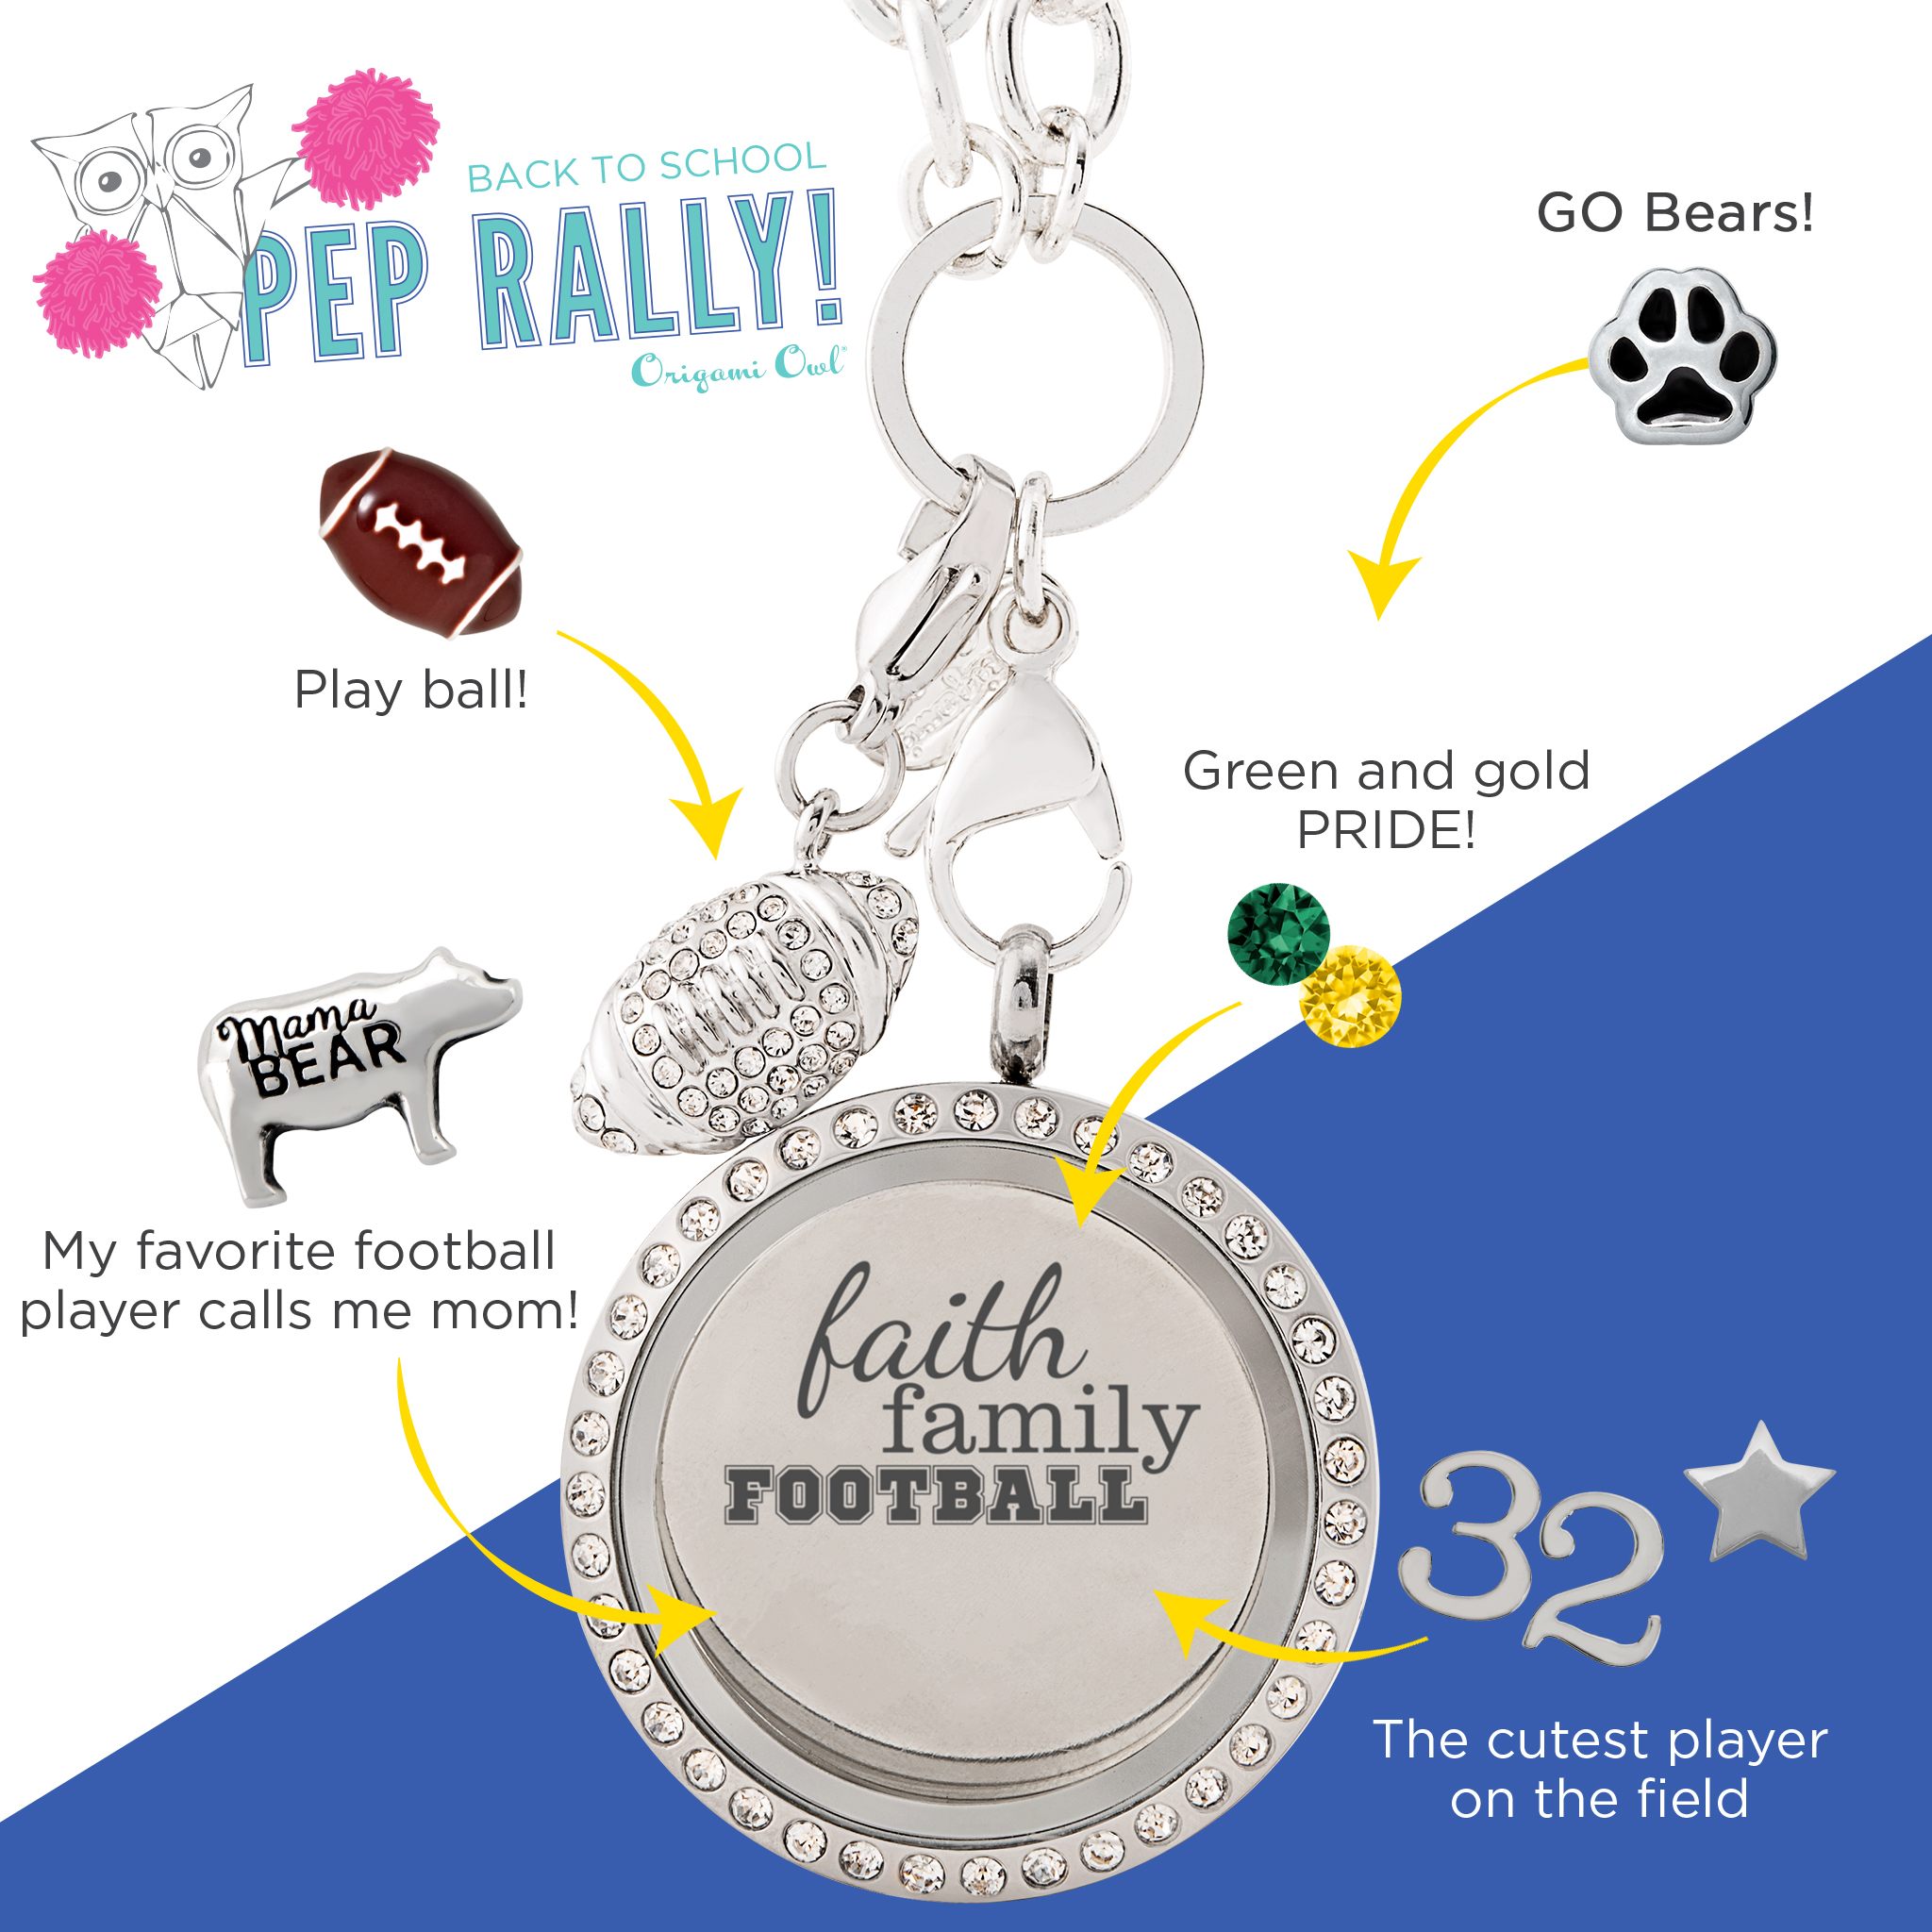 Origami Owl Family Its A Back To School Pep Rally Origamiowlnews